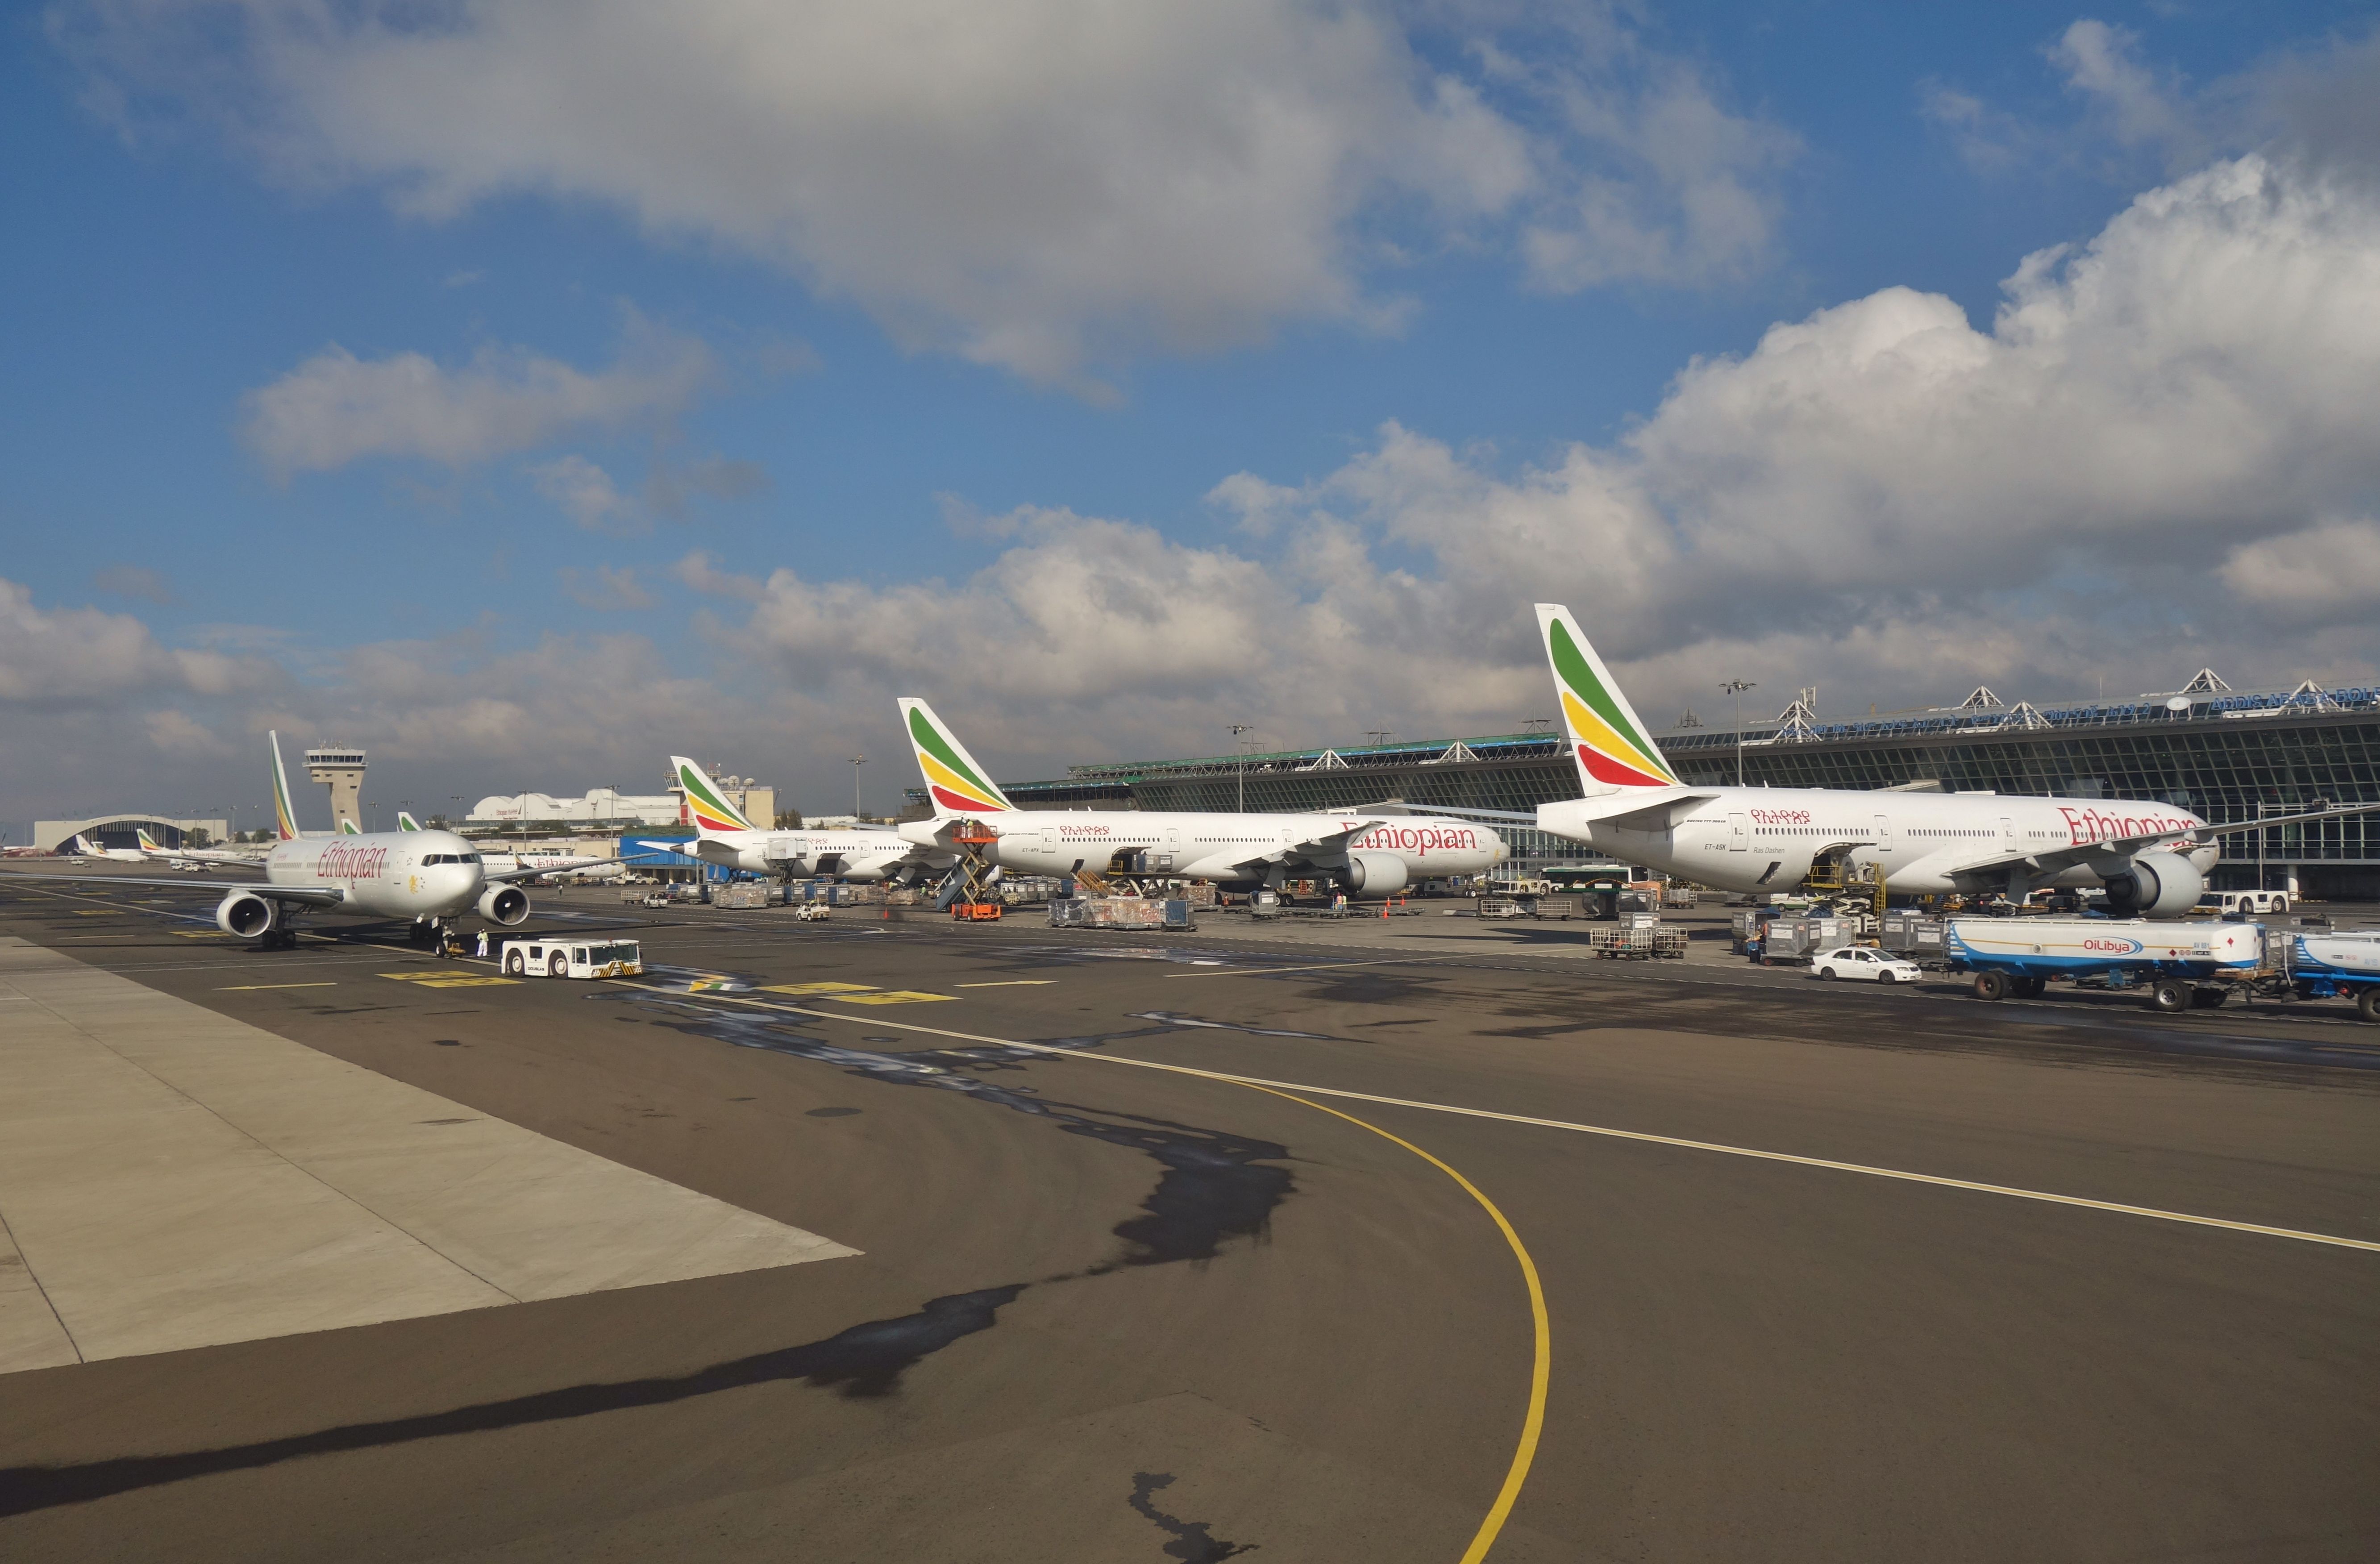 irplanes from Ethiopian Airlines (ET) lined at the Addis Ababa Bole International Airport (ADD), formerly Haile Selassie International Airport